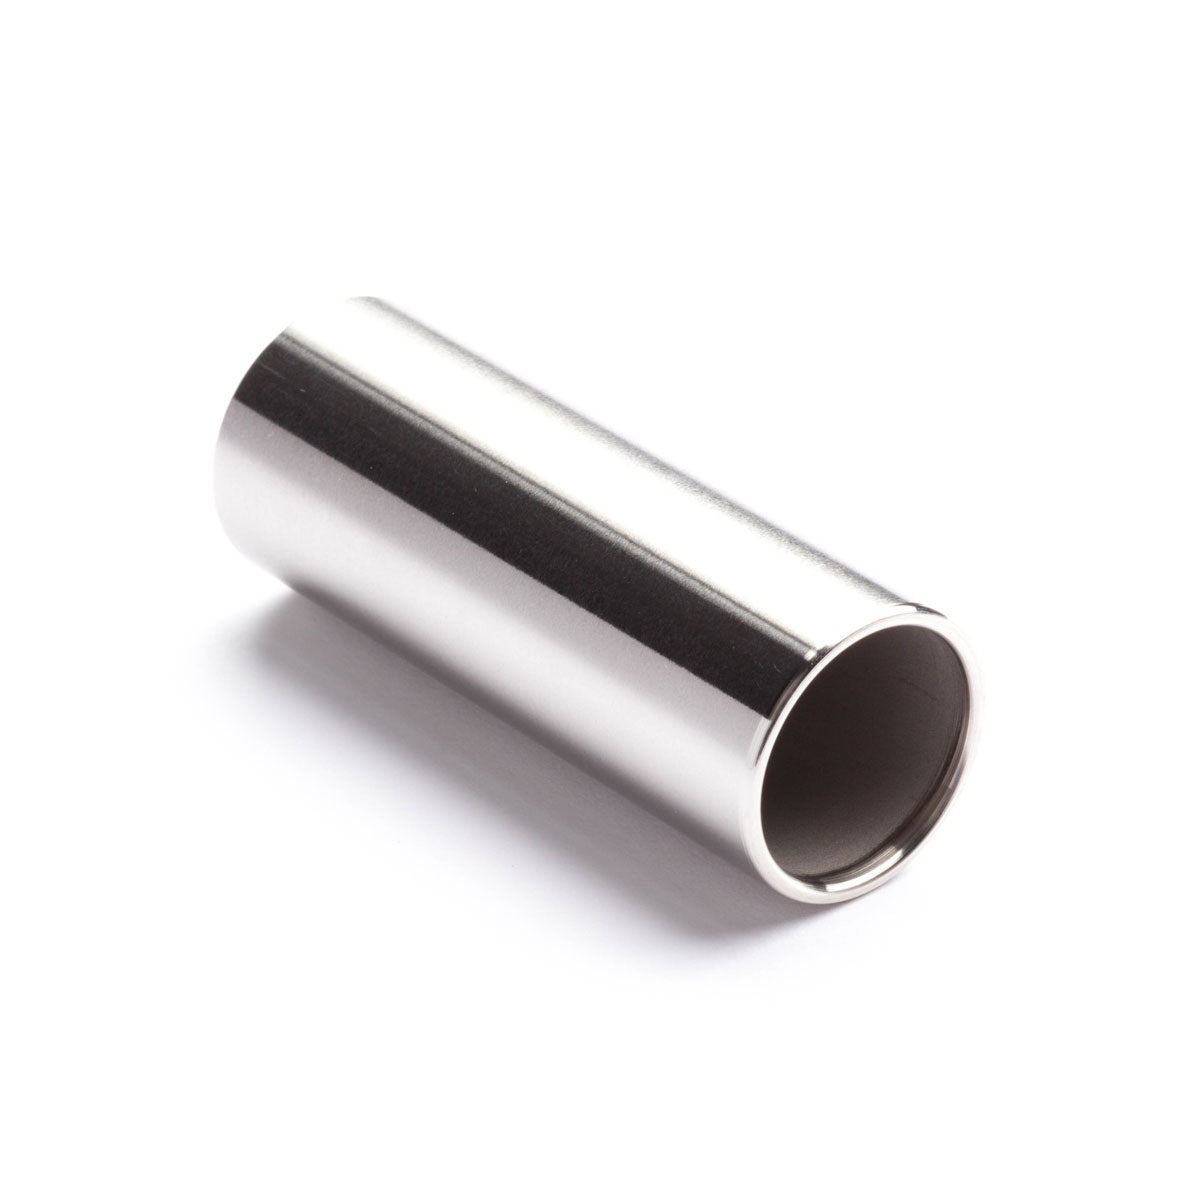 Dunlop 225 Stainless Steel Slide Small